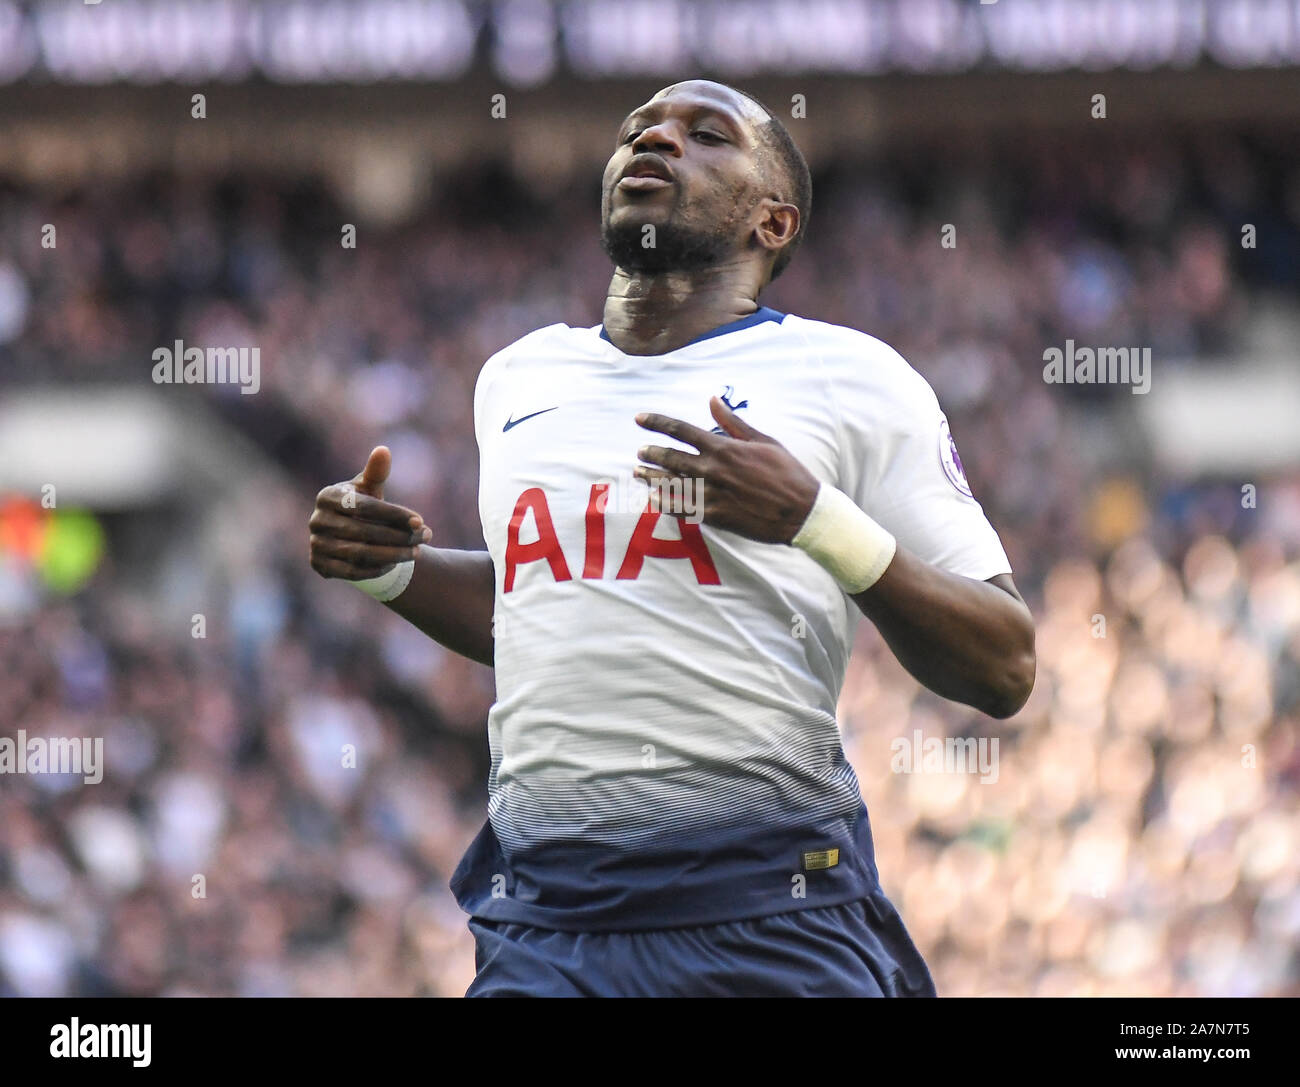 LONDON, ENGLAND - MARCH 2, 2019: Moussa Sissoko of Tottenham pictured during the 2018/19 Premier League game between Tottenham Hotspur and Arsenal FC at Wembley Stadium. Stock Photo